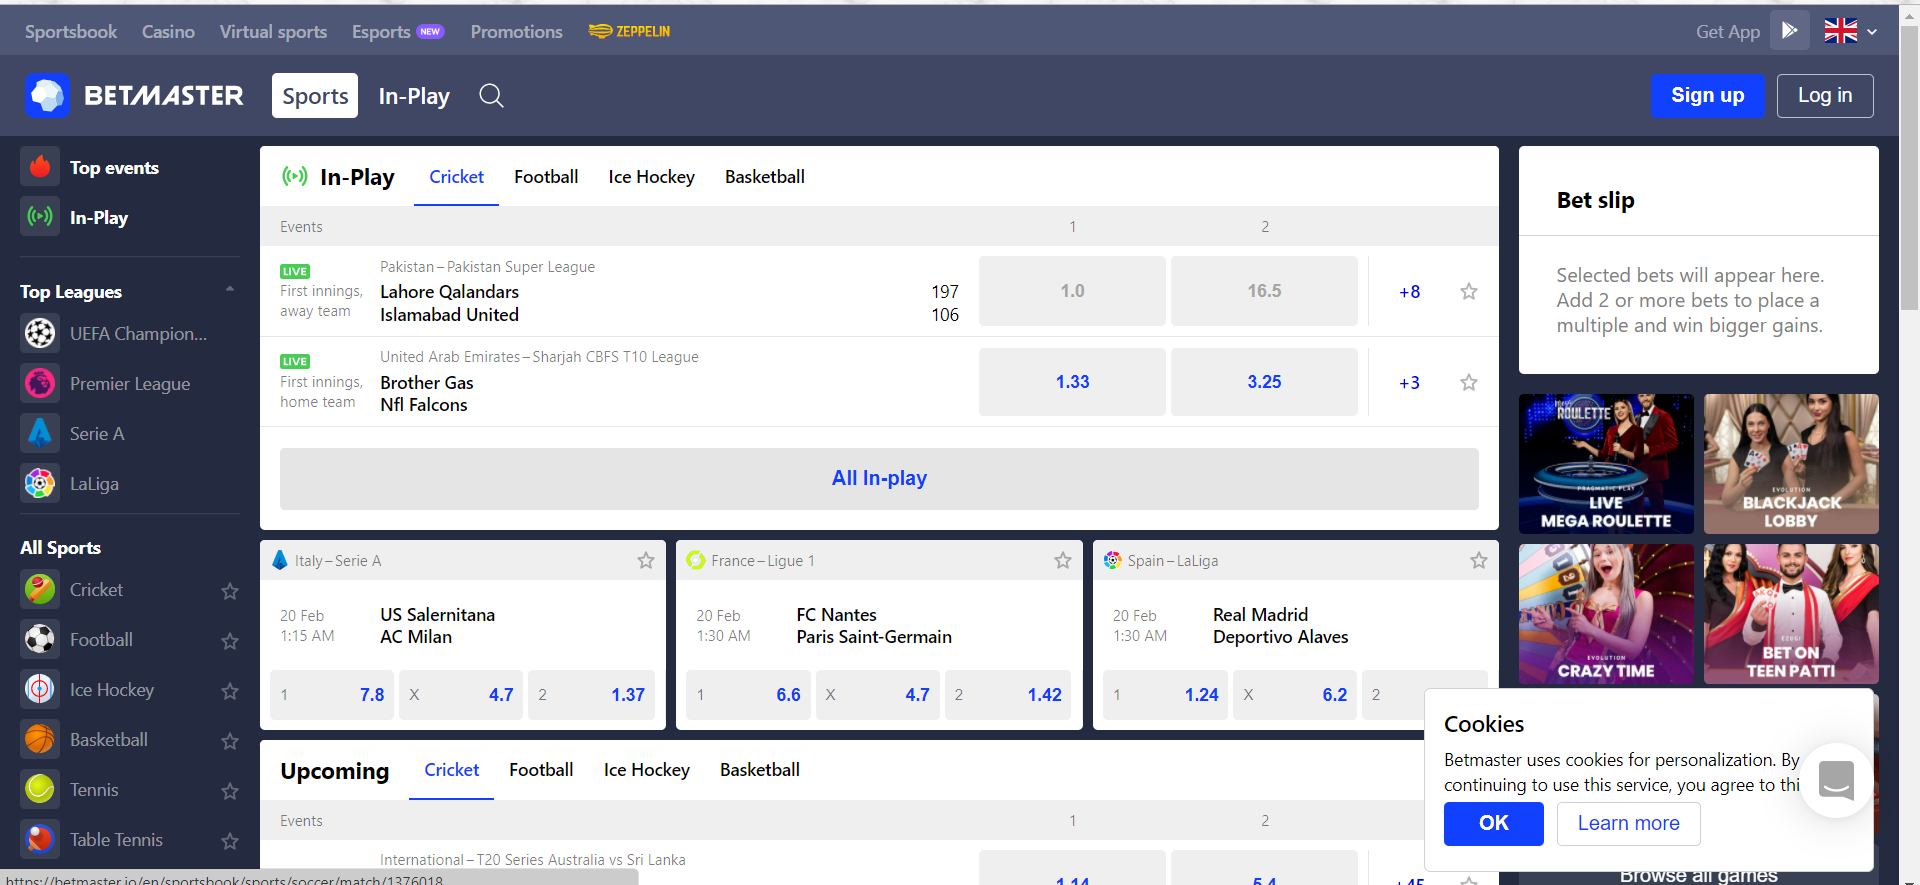 Website page of Betmaster, showing the page for Sportsbook